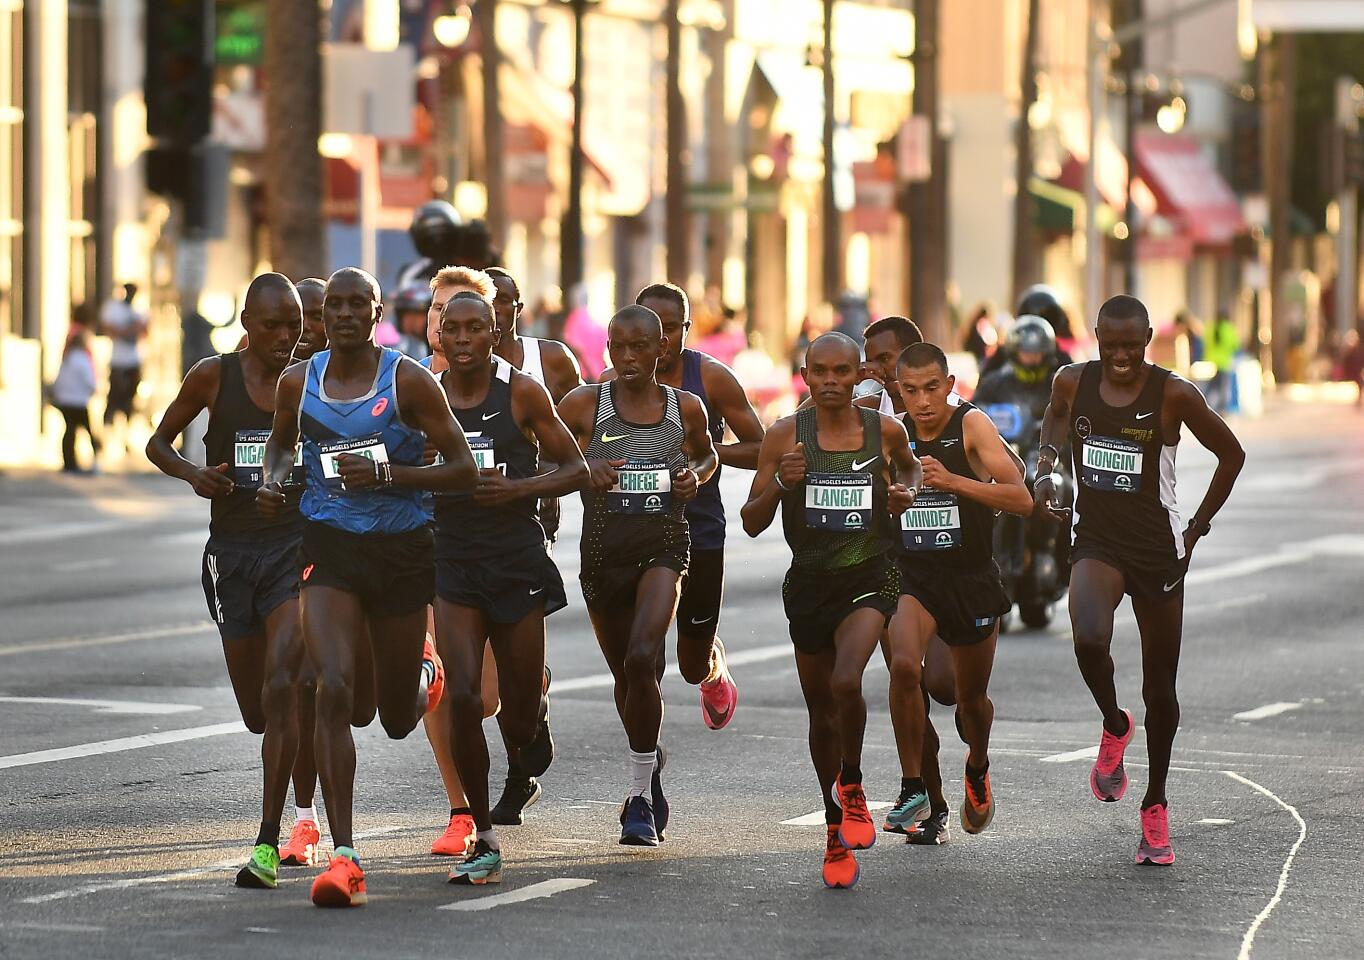 The lead pack of runners compete along Hollywood Blvd. in Hollywood Sunday during L.A. Marathon.